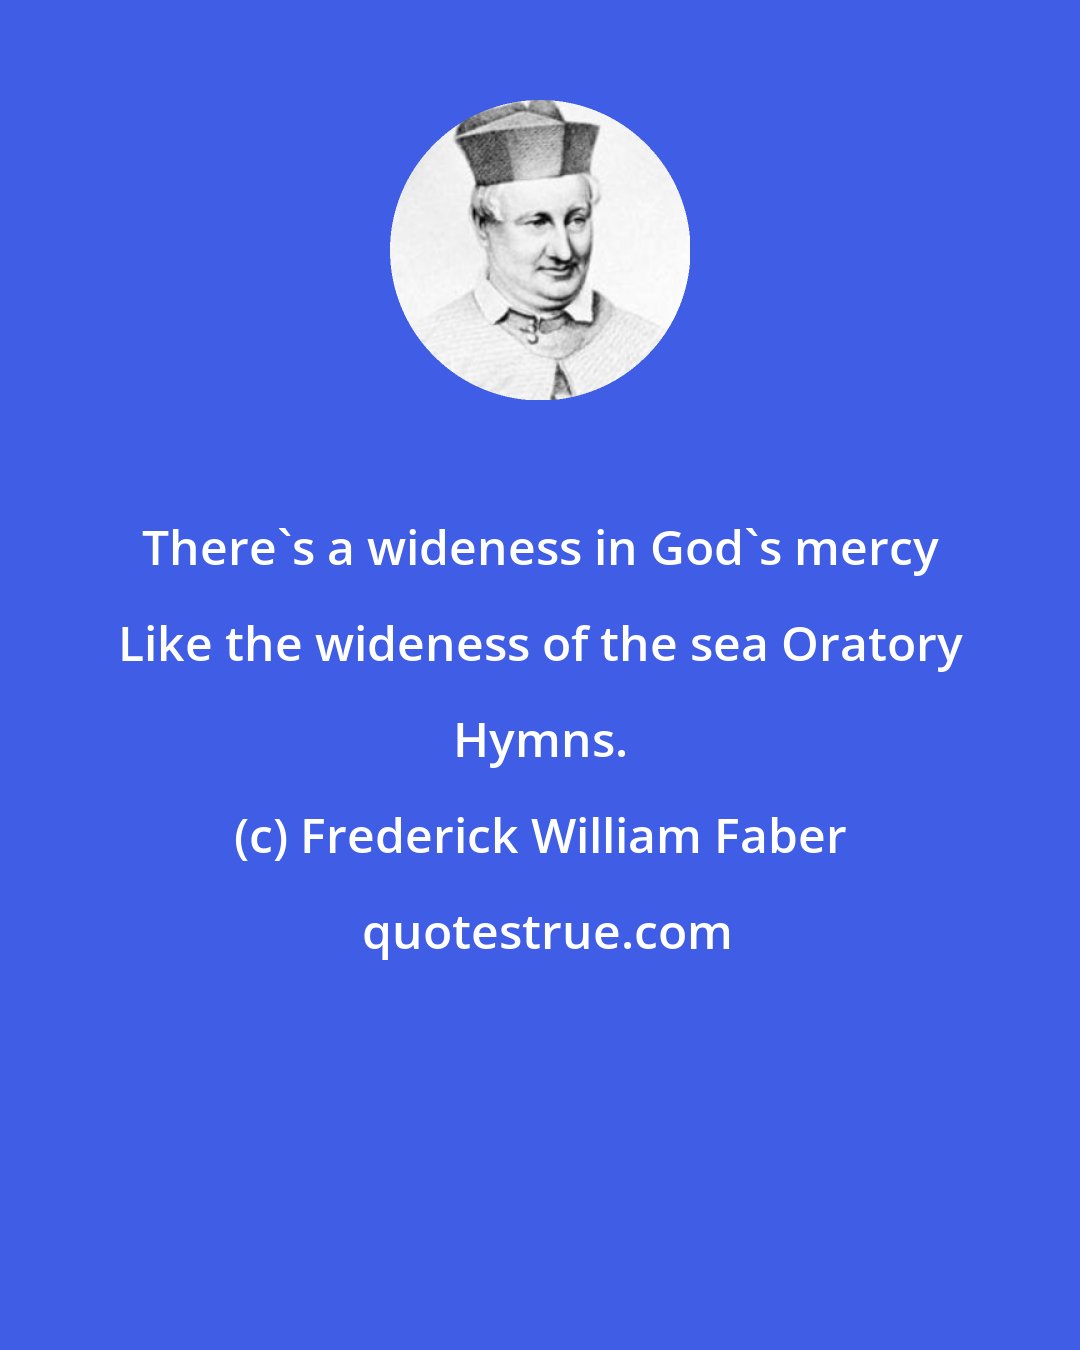 Frederick William Faber: There's a wideness in God's mercy Like the wideness of the sea Oratory Hymns.